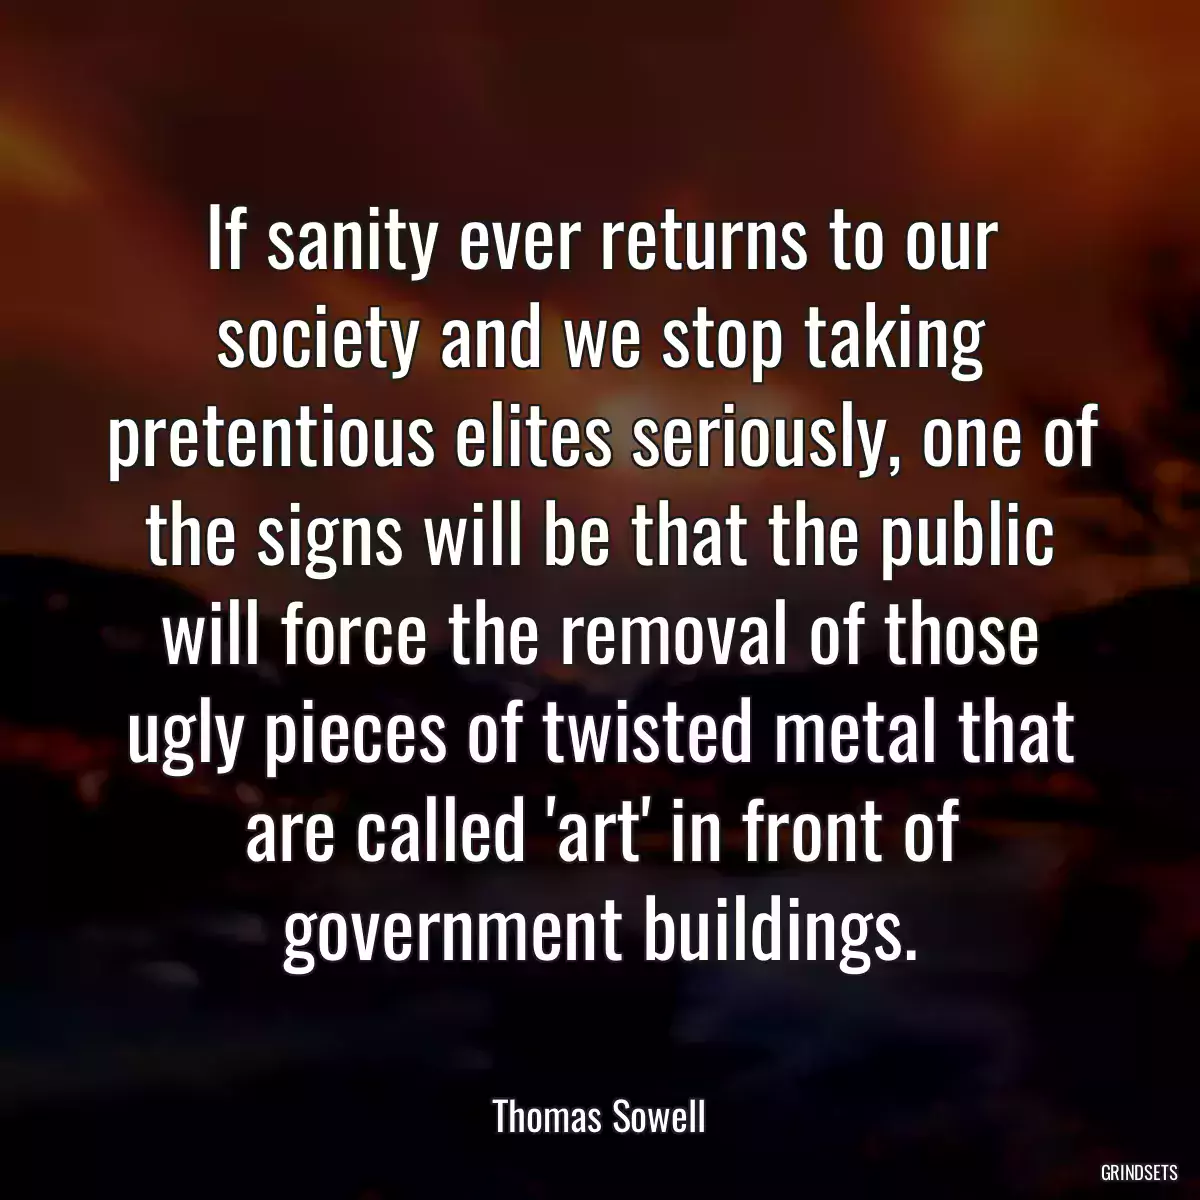 If sanity ever returns to our society and we stop taking pretentious elites seriously, one of the signs will be that the public will force the removal of those ugly pieces of twisted metal that are called \'art\' in front of government buildings.